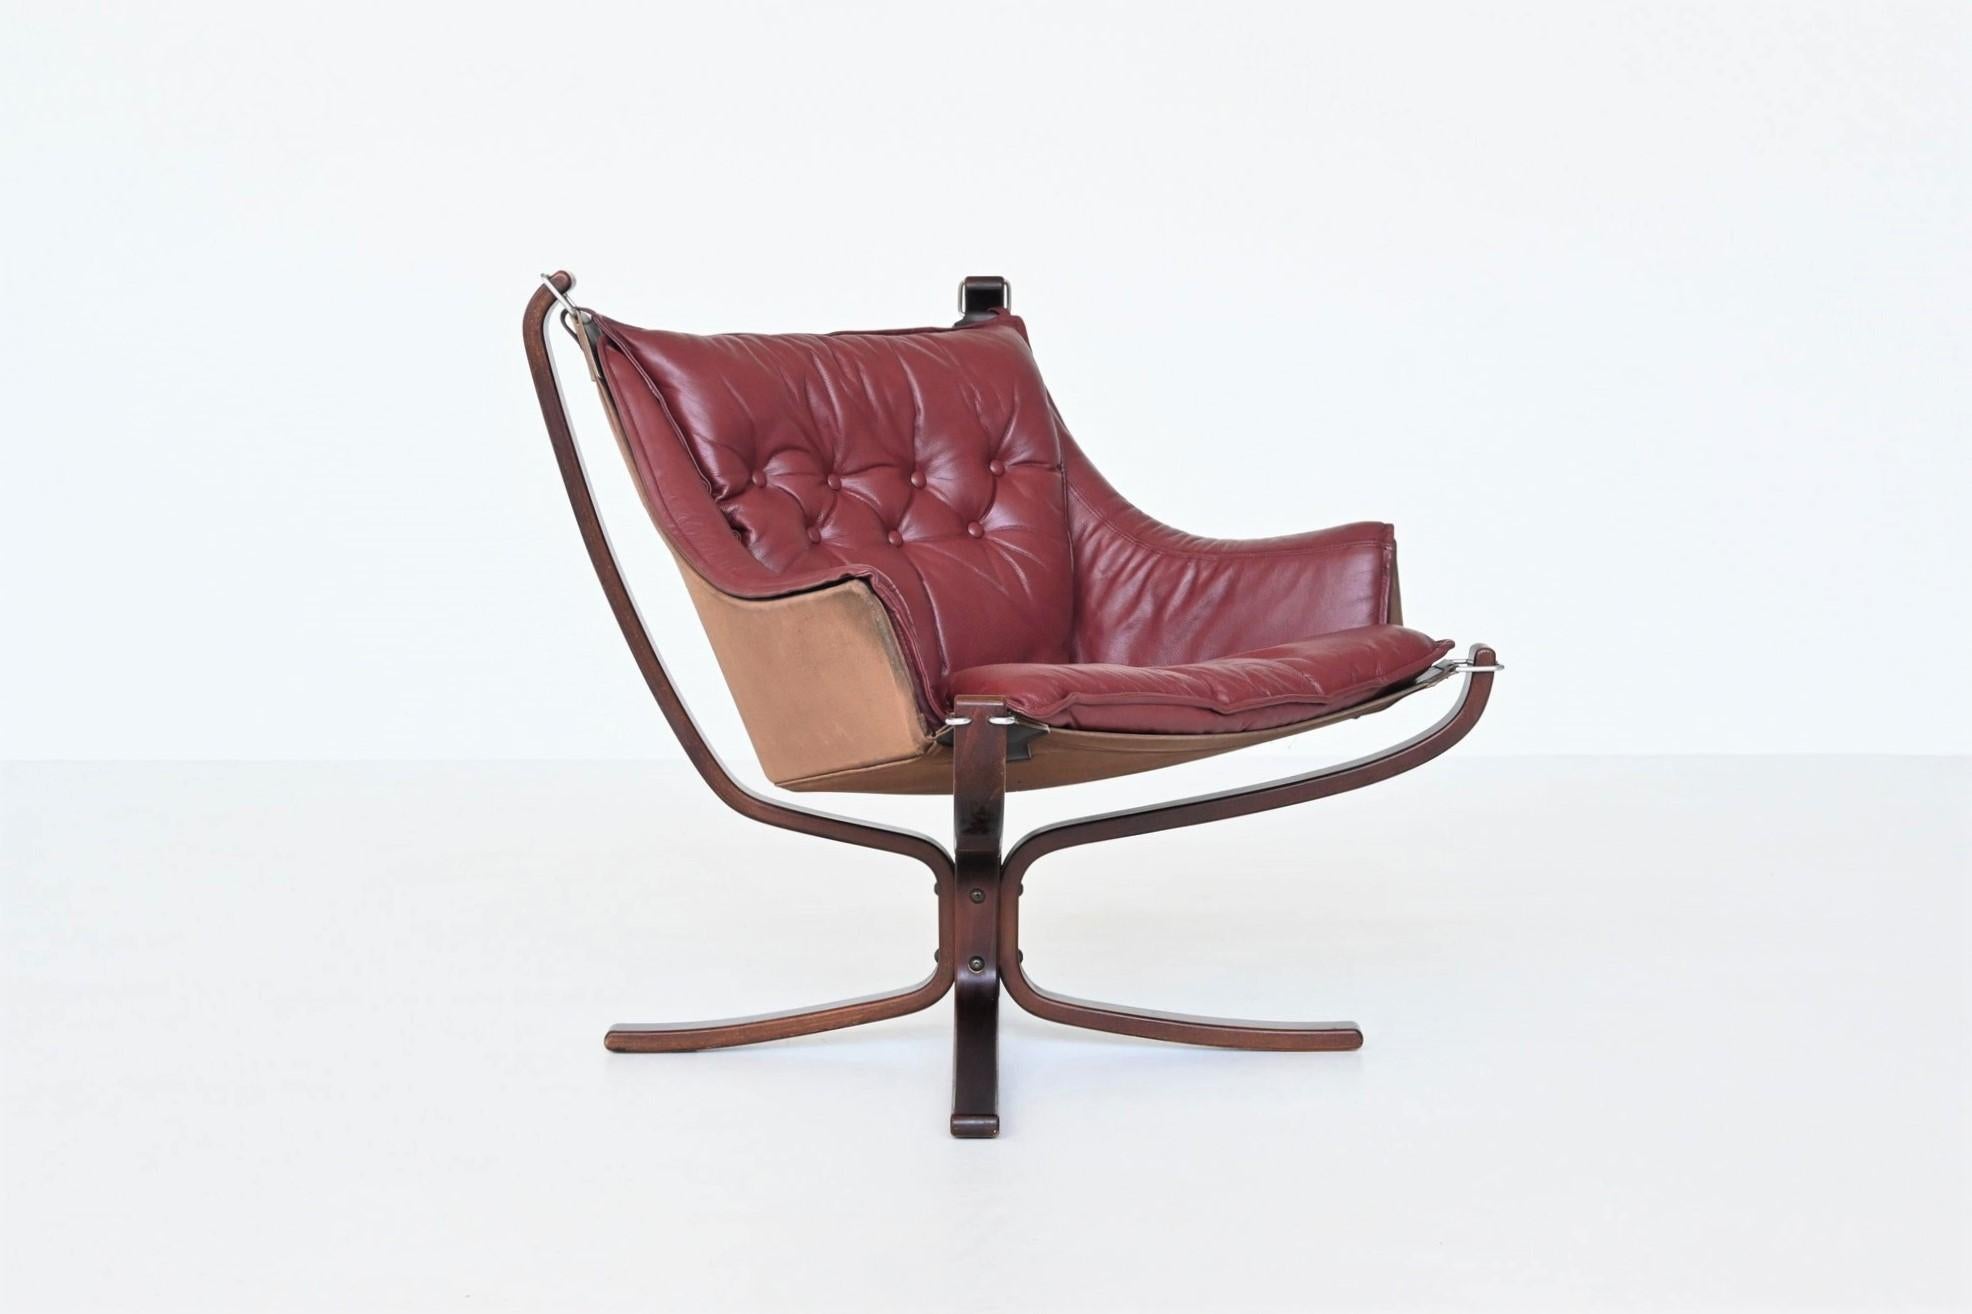 Iconic X-framed low back Falcon lounge chair designed by Sigurd Ressell for Vatne Mobler, Norway 1970. They feature a curved stained beech wooden frame, canvas sling and burgundy (red) leather cushions. The hammock style floating seat has become a